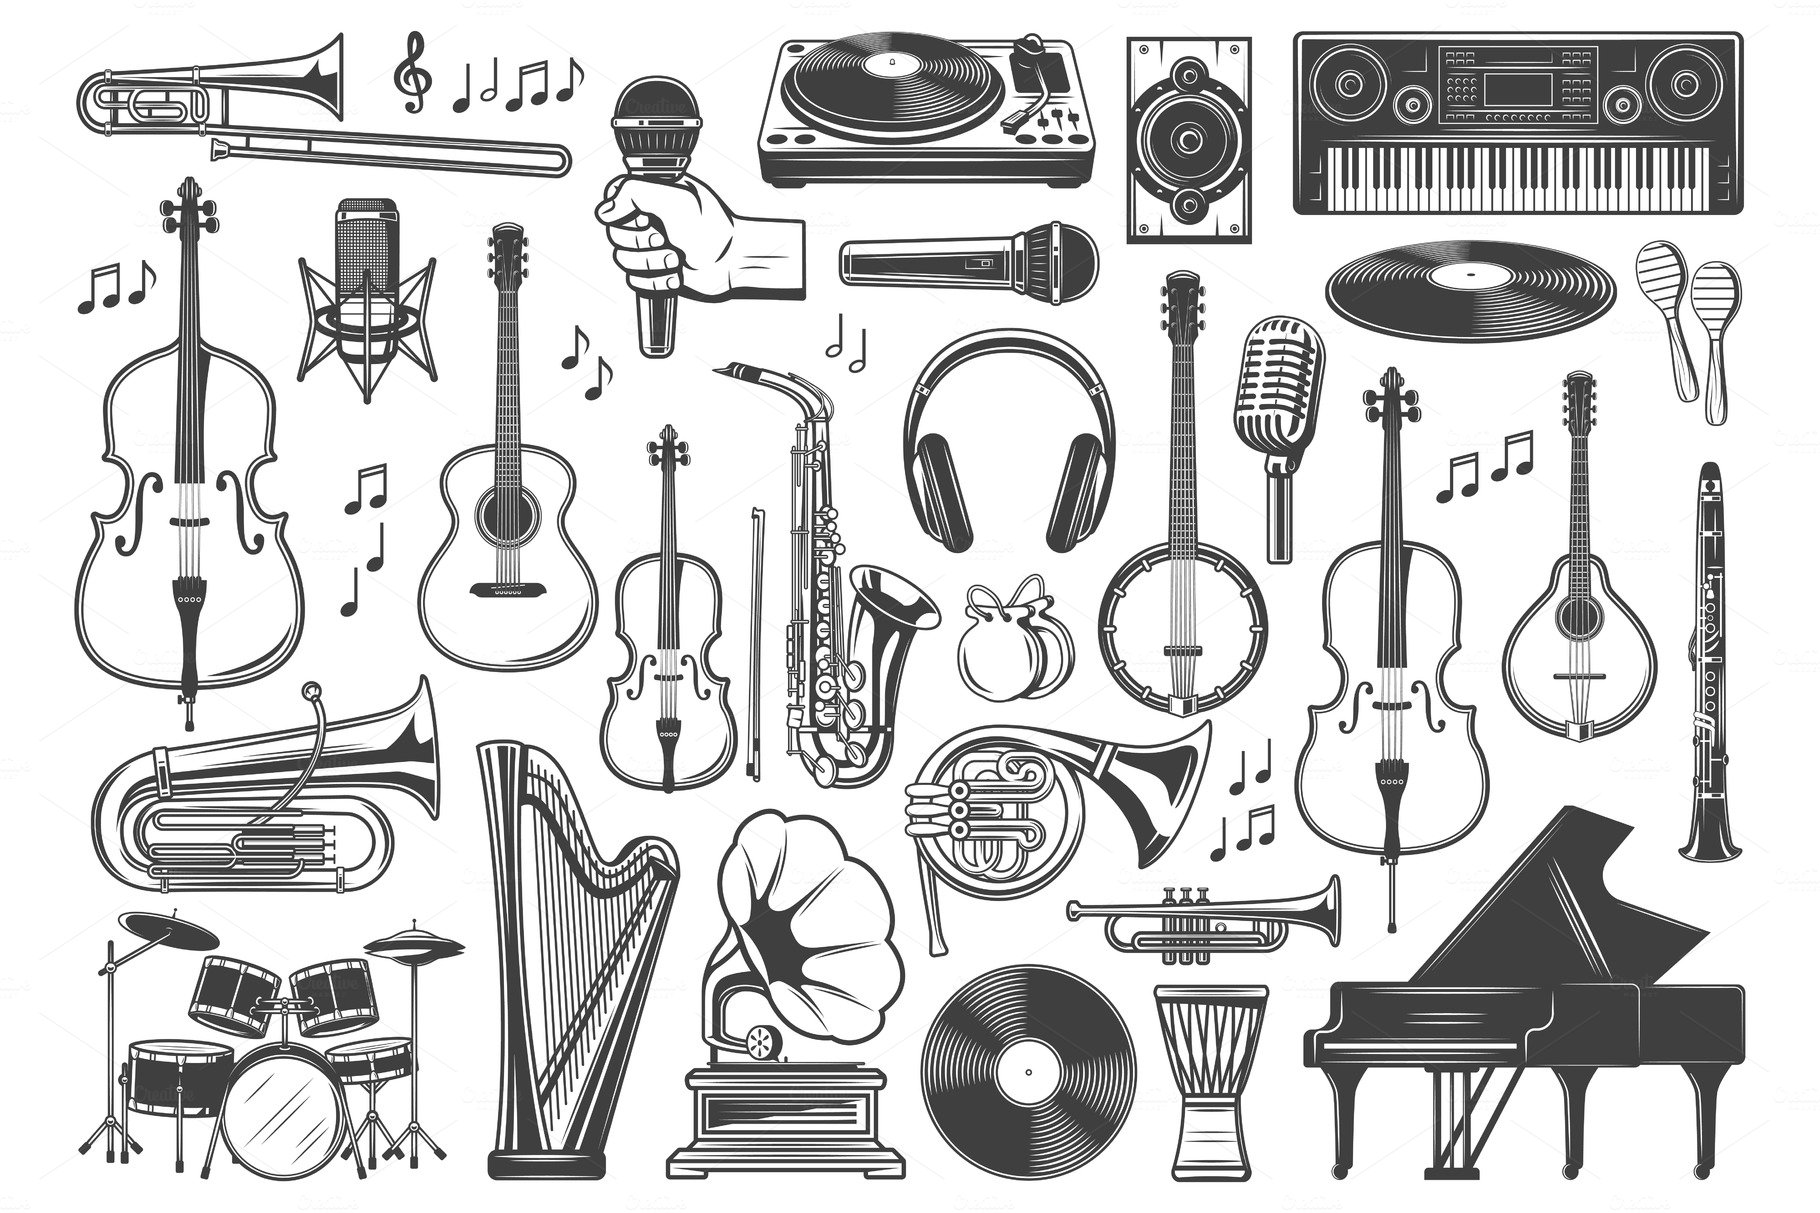 Hand drawn musical instruments collection in a BW style.